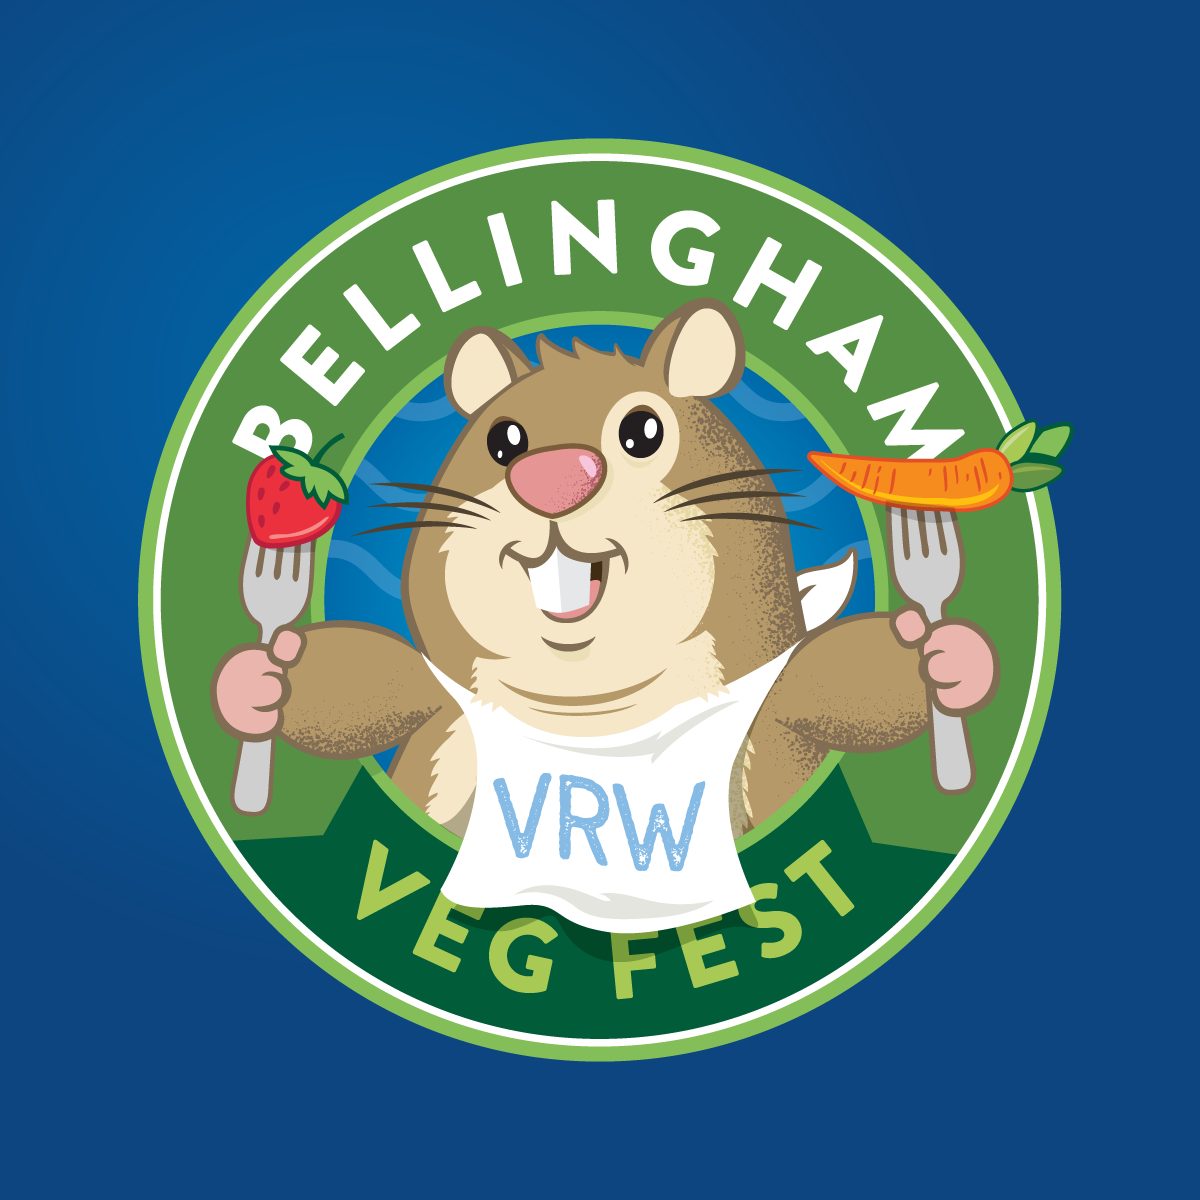 Hamster with a bib on that is holding two forks eating veggies. Says Bellingham Veg Fest in a circle around hamster.